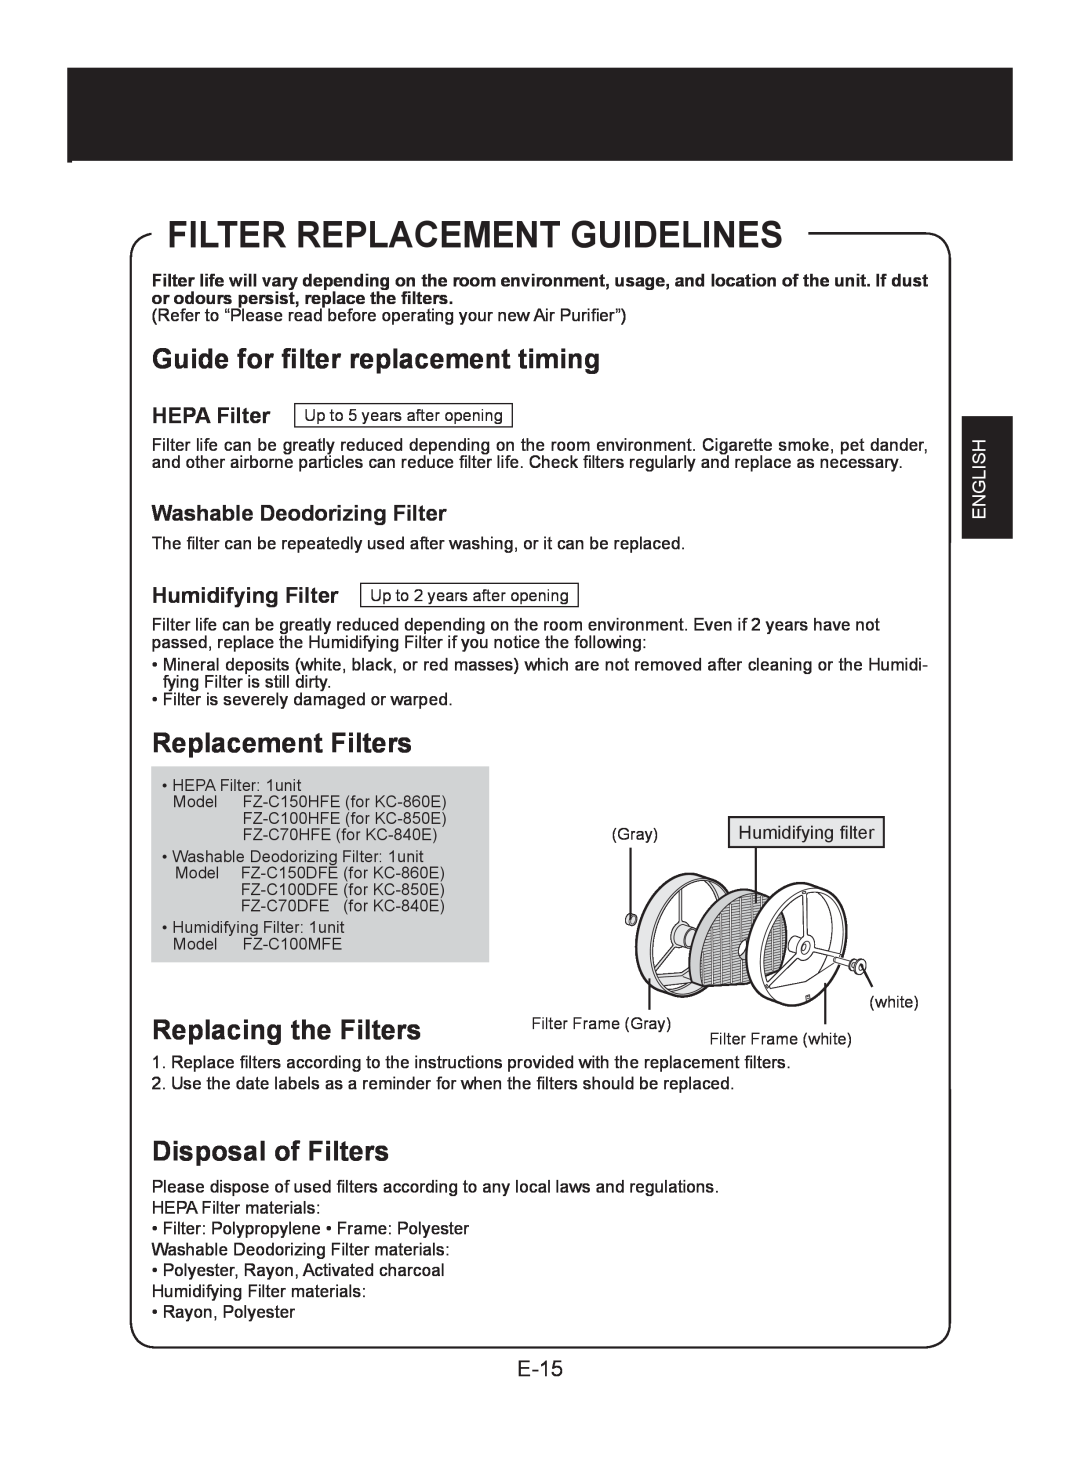 Sharp KC-850E Filter Replacement Guidelines, Guide for filter replacement timing, Replacement Filters, Disposal of Filters 